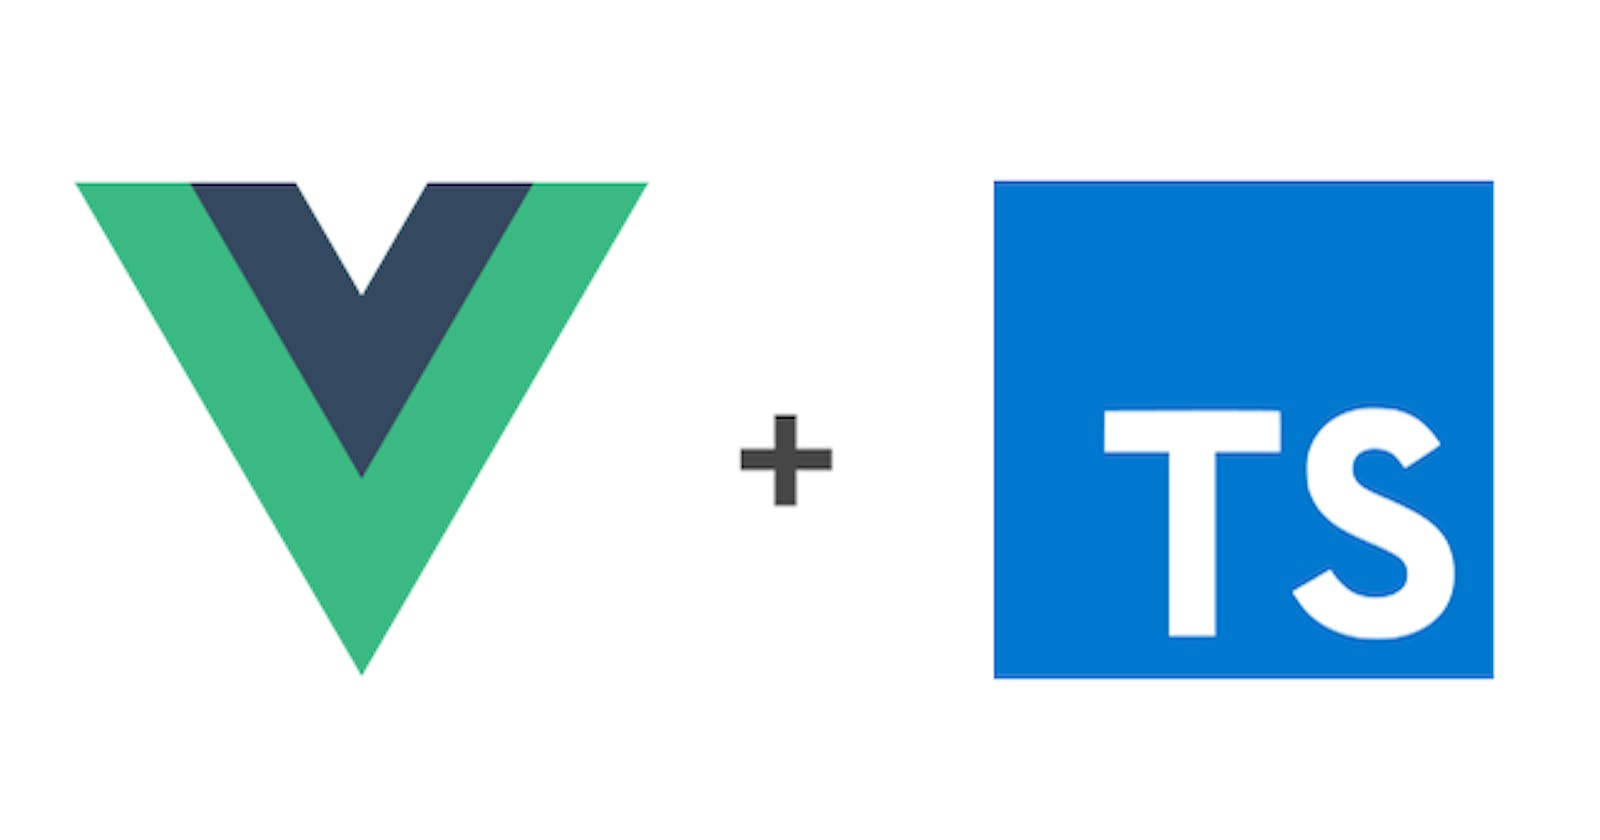 Getting started with Vue.js3 and Typescript: A Beginners Guide